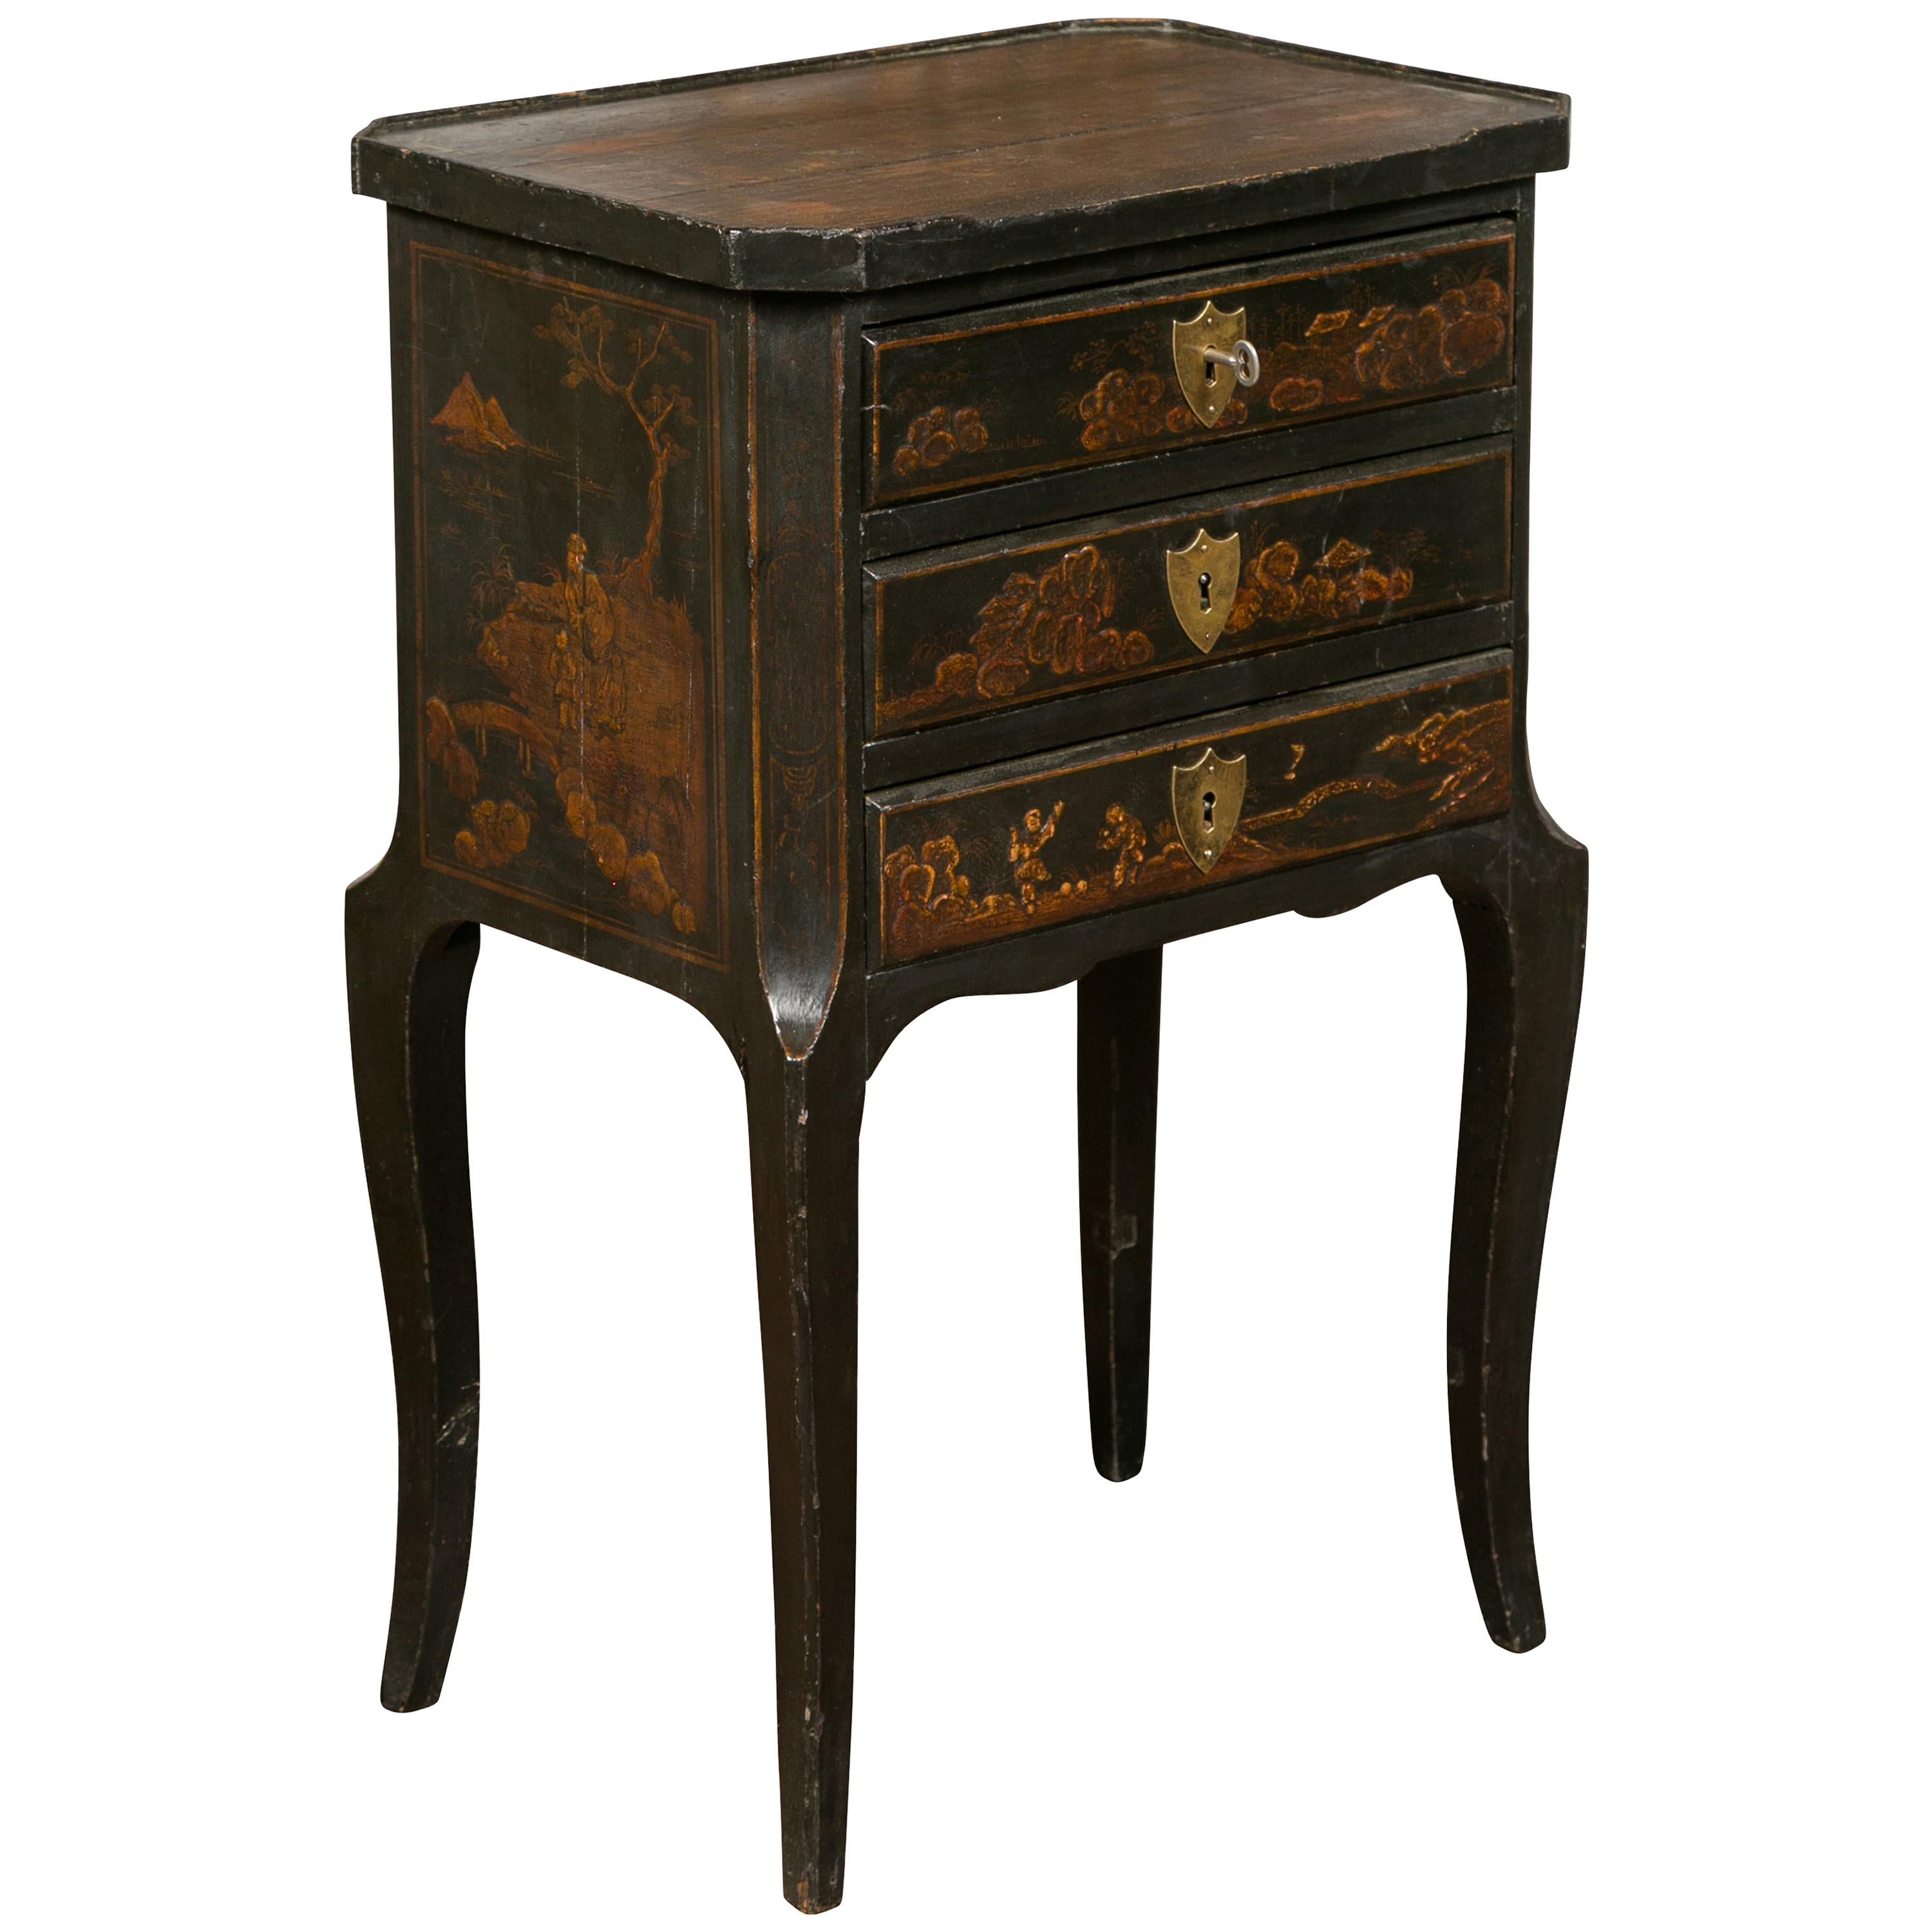 English 1900s Black Chinoiserie Bedside Table with Thin Drawers and Curving Leg